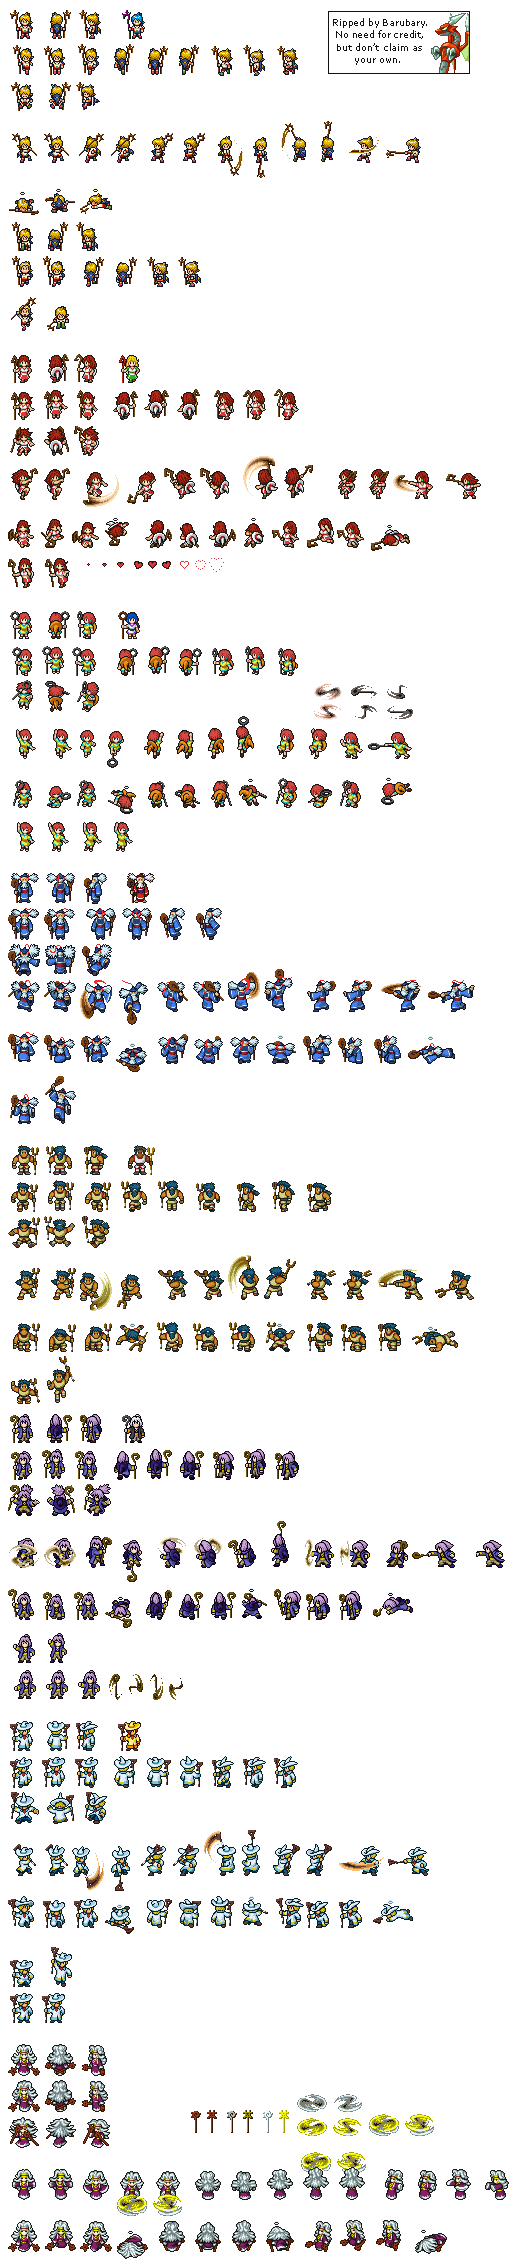 DS / DSi - Lost Magic - Characters - The Spriters Resource